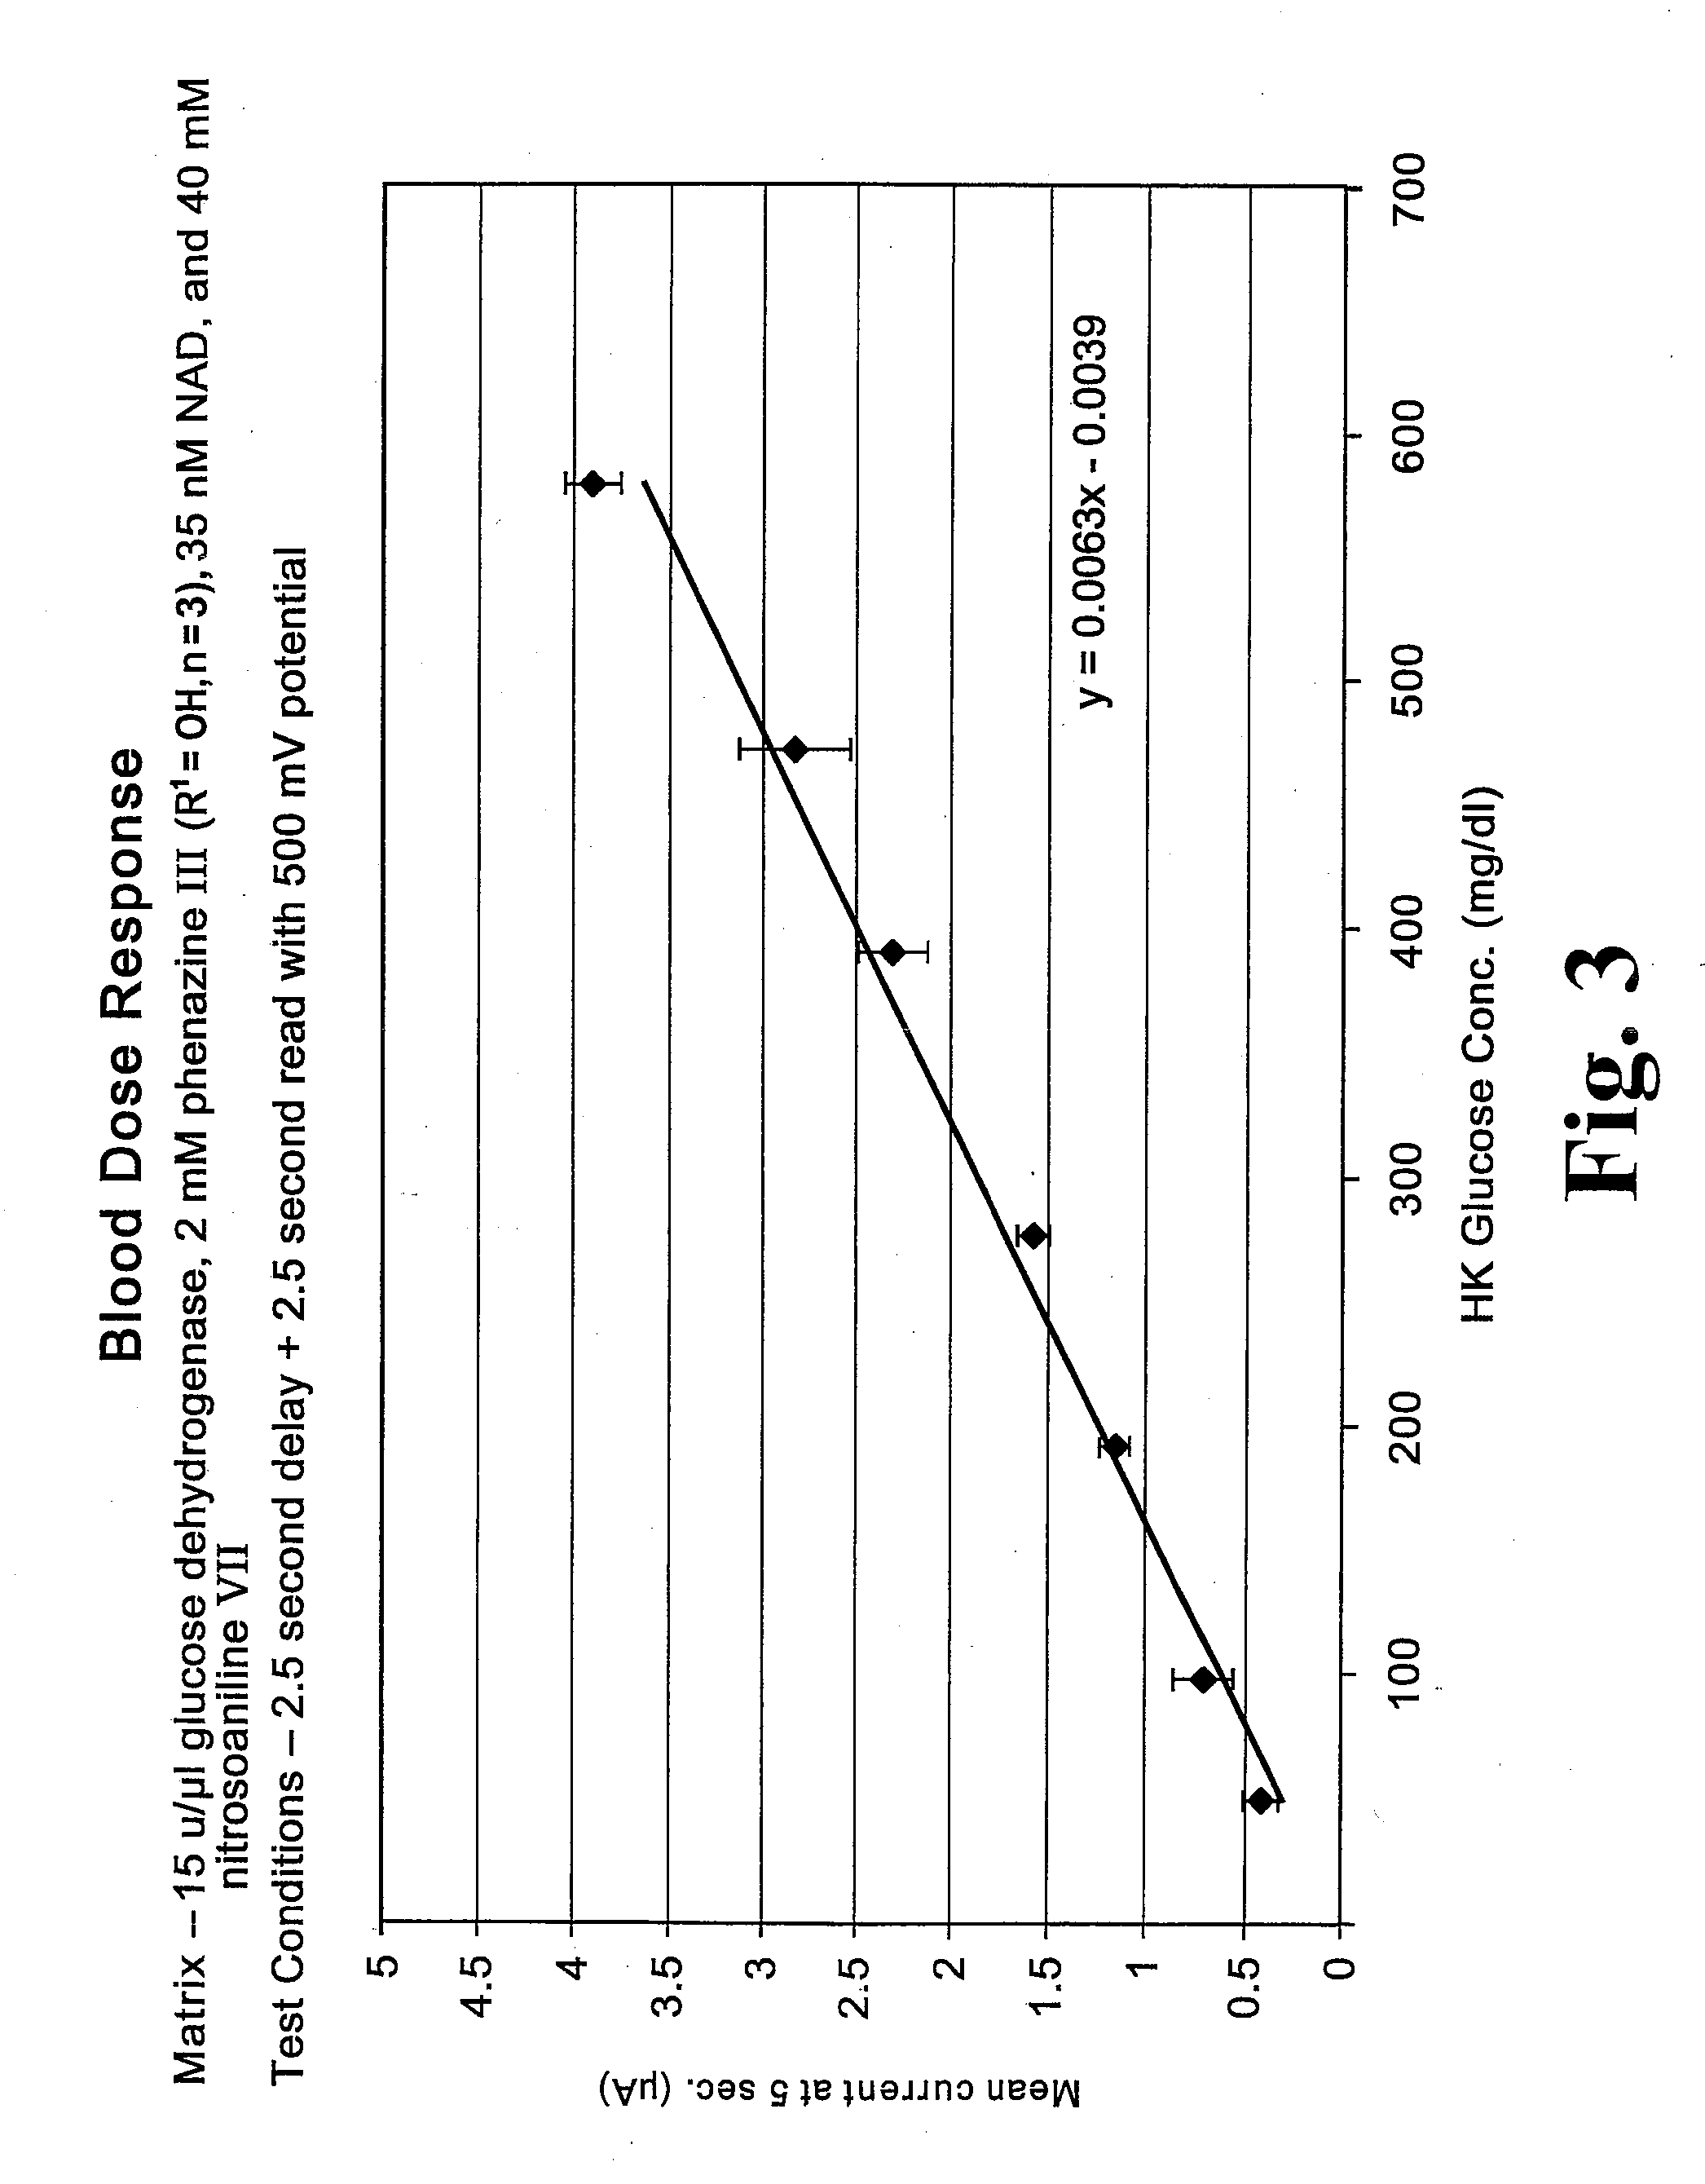 Biosensor with improved analyte specificity